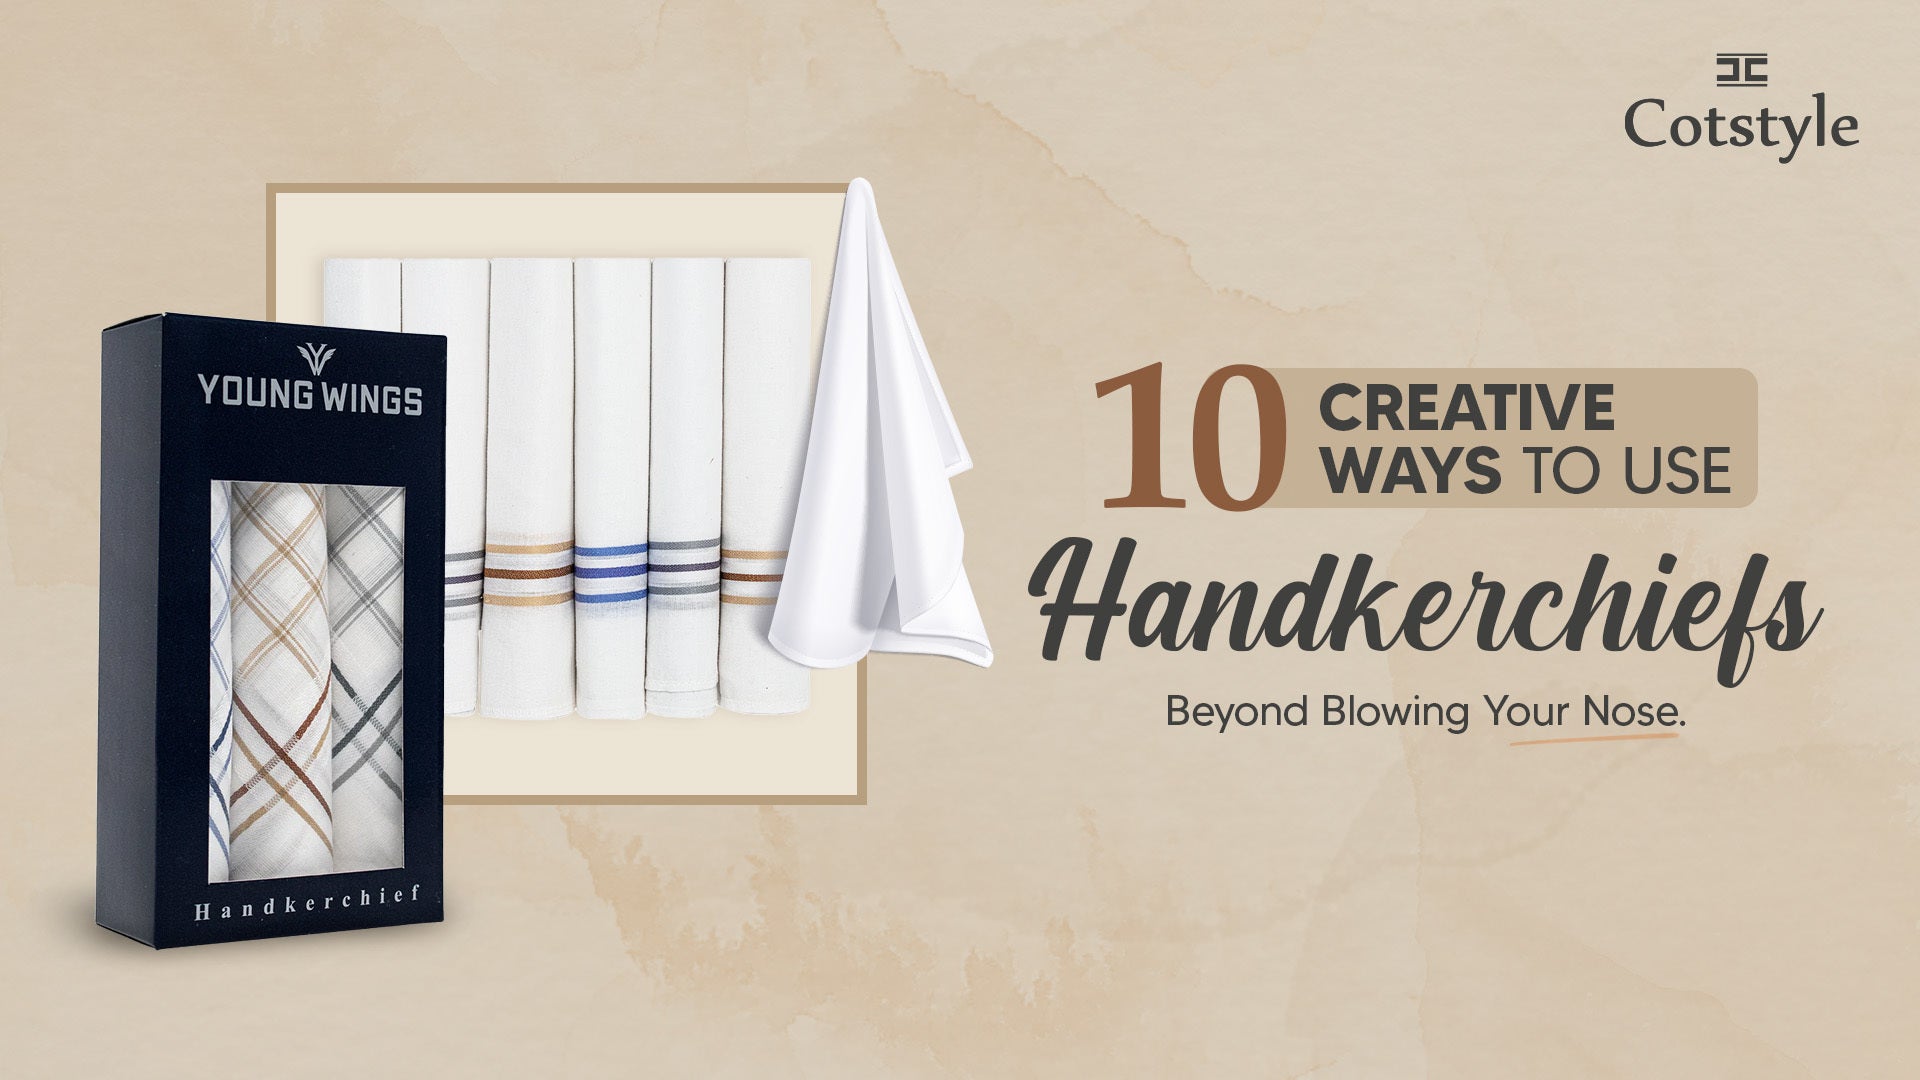 10 Creative Ways to Use Handkerchiefs Beyond Blowing Your Nose